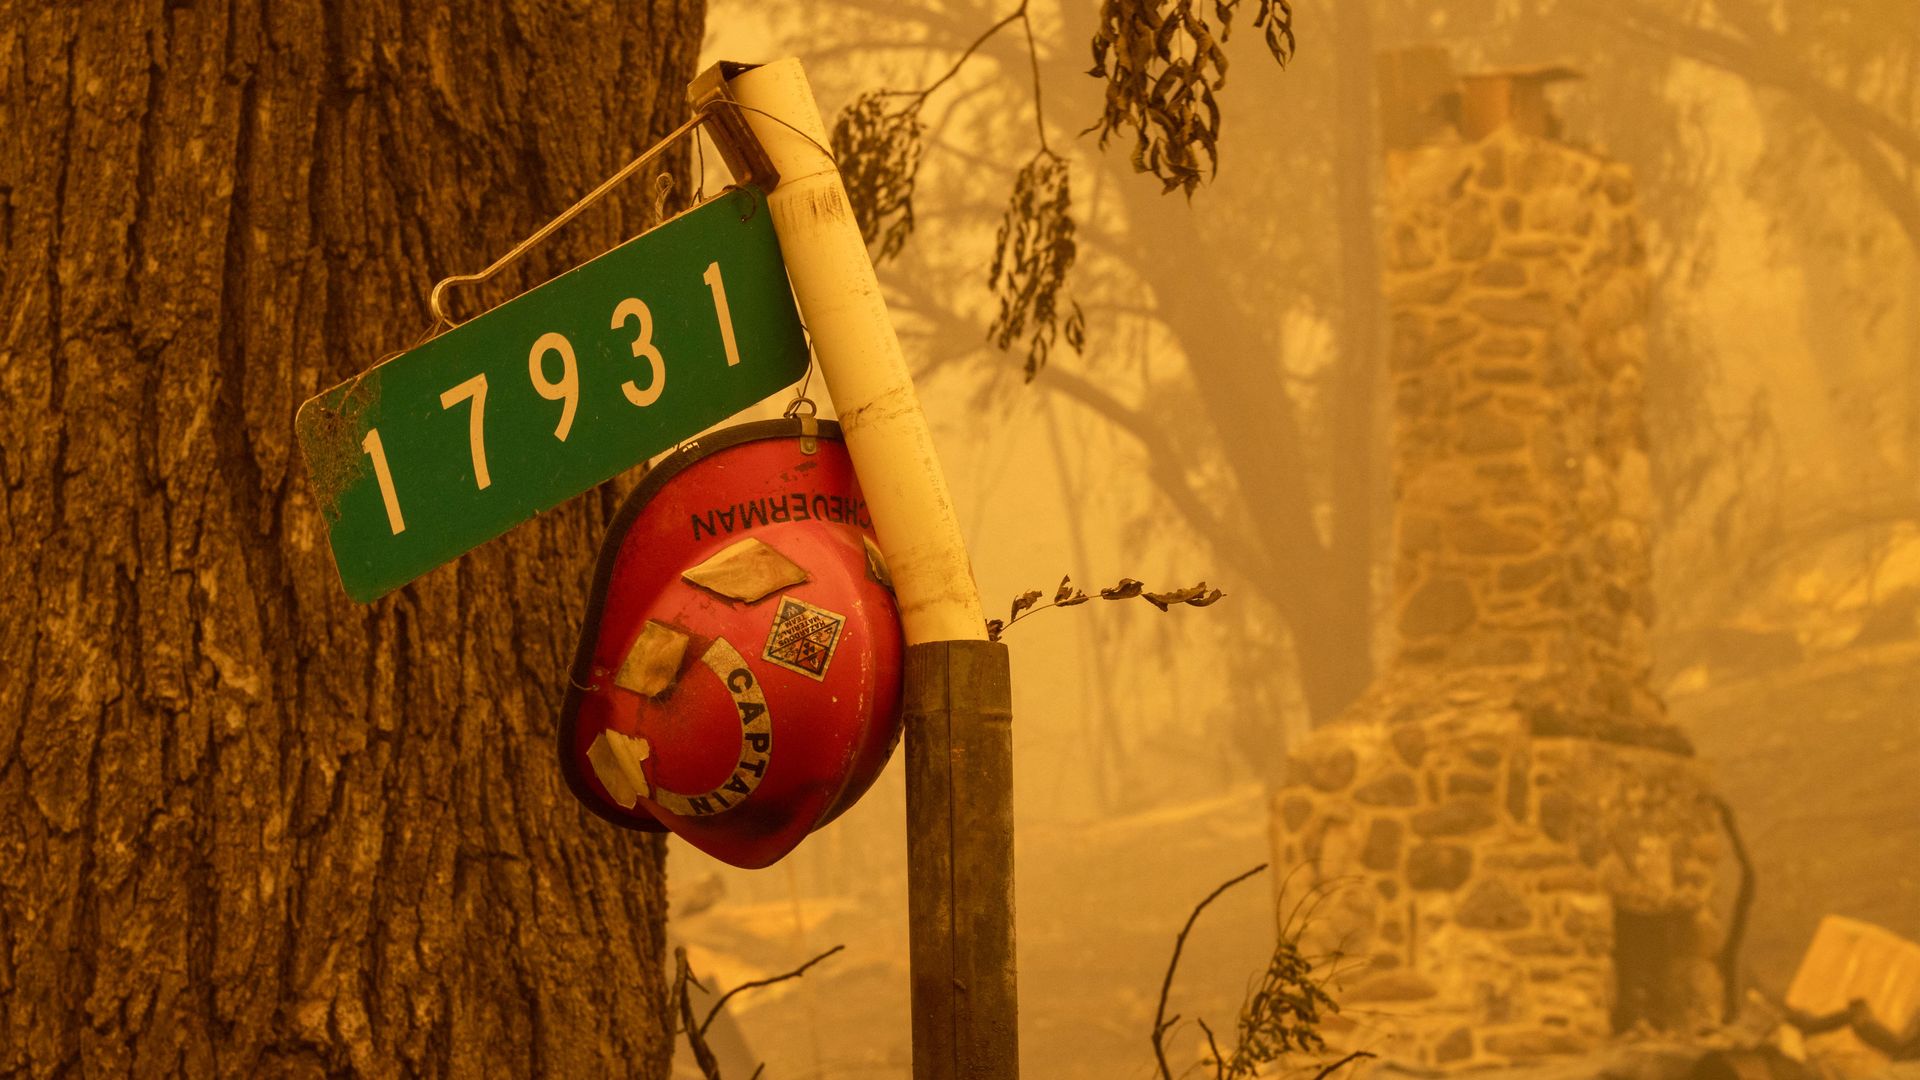 A firefighter helmet hangs at the entrance to a property in the community of Klamath River, which burned in the McKinney Fire, in Klamath National Forest, northwest of Yreka, California, on July 31.